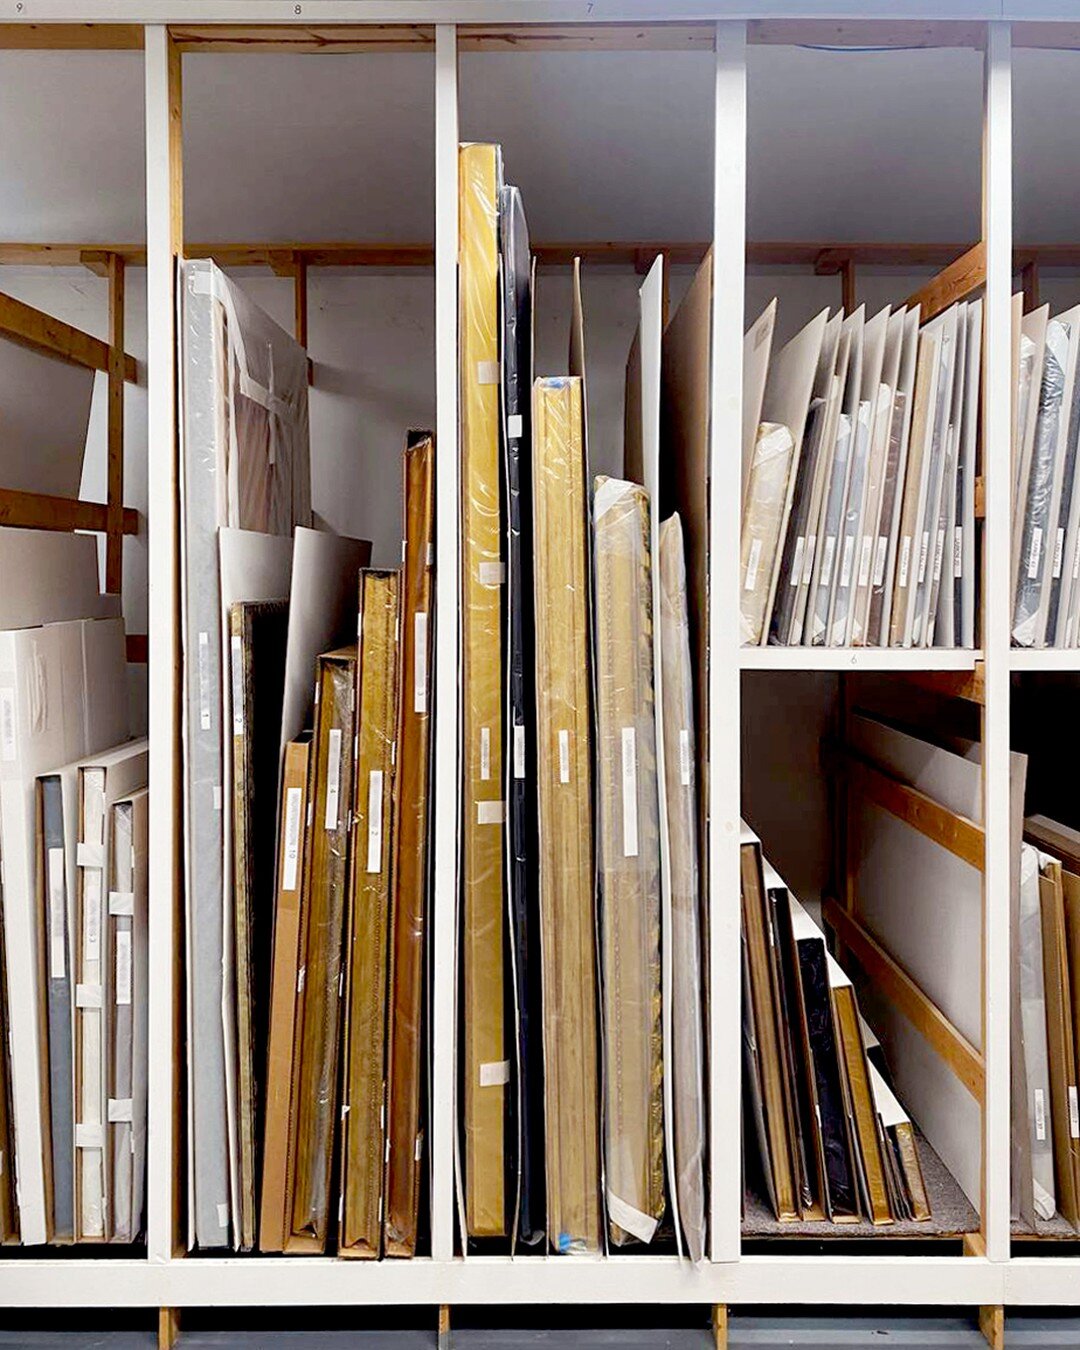 Every collection is unique, but deserves the same amount of care and consideration.

Elevate your collection with our museum quality art storage &amp; collections management solutions. 

#ArtStorage#PreserveWithCare#museumservices#collectionsmanageme